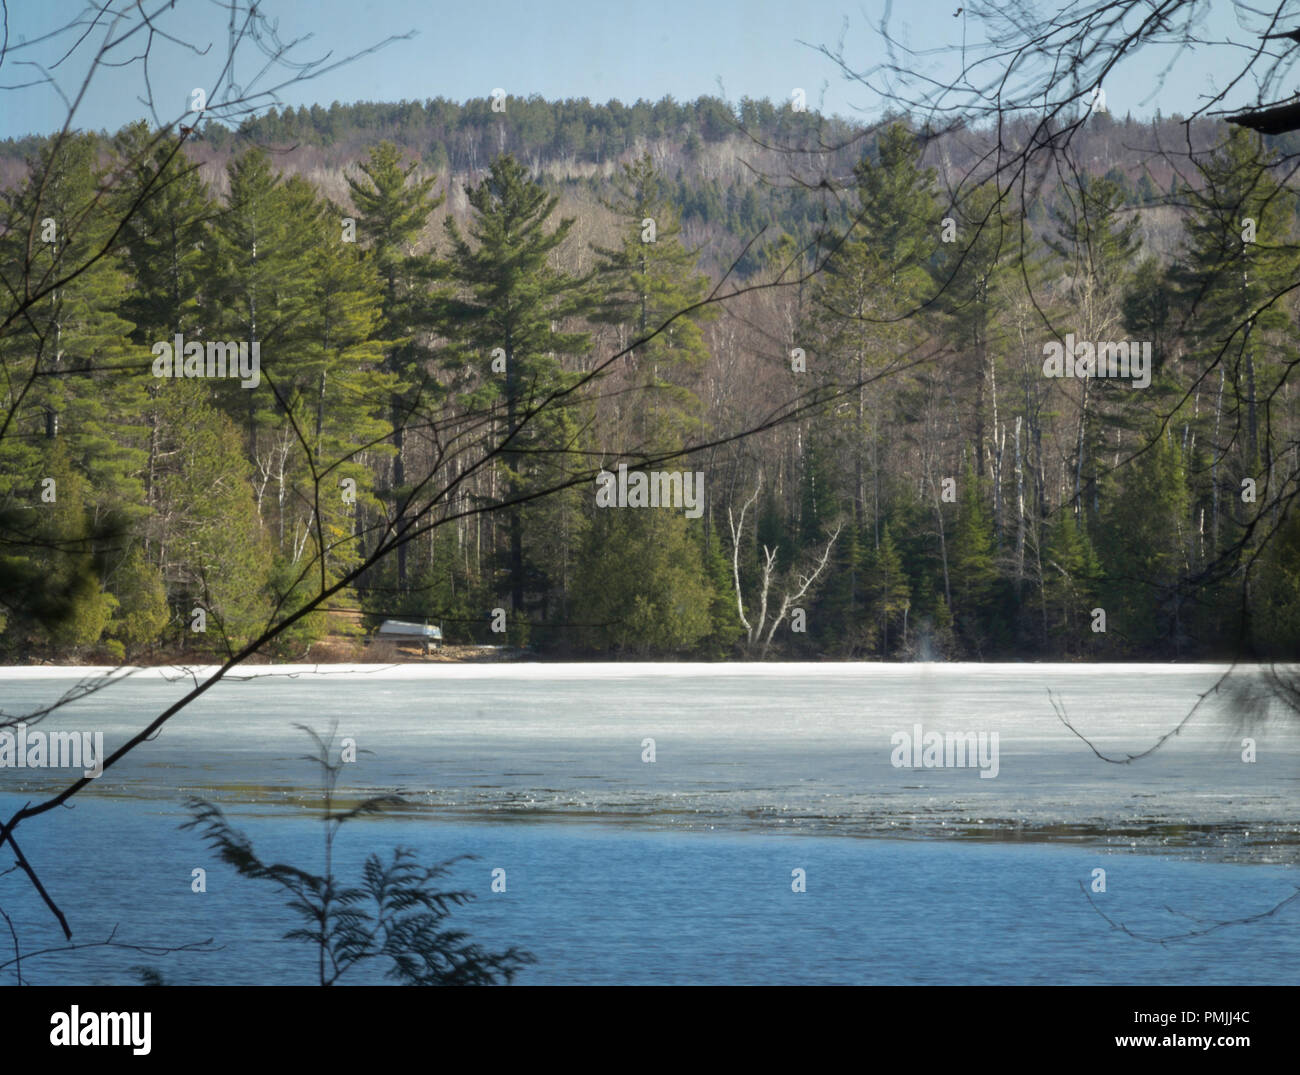 Spring thaw in Renfrew Valley, Canada, with ice melting on a small lake Stock Photo